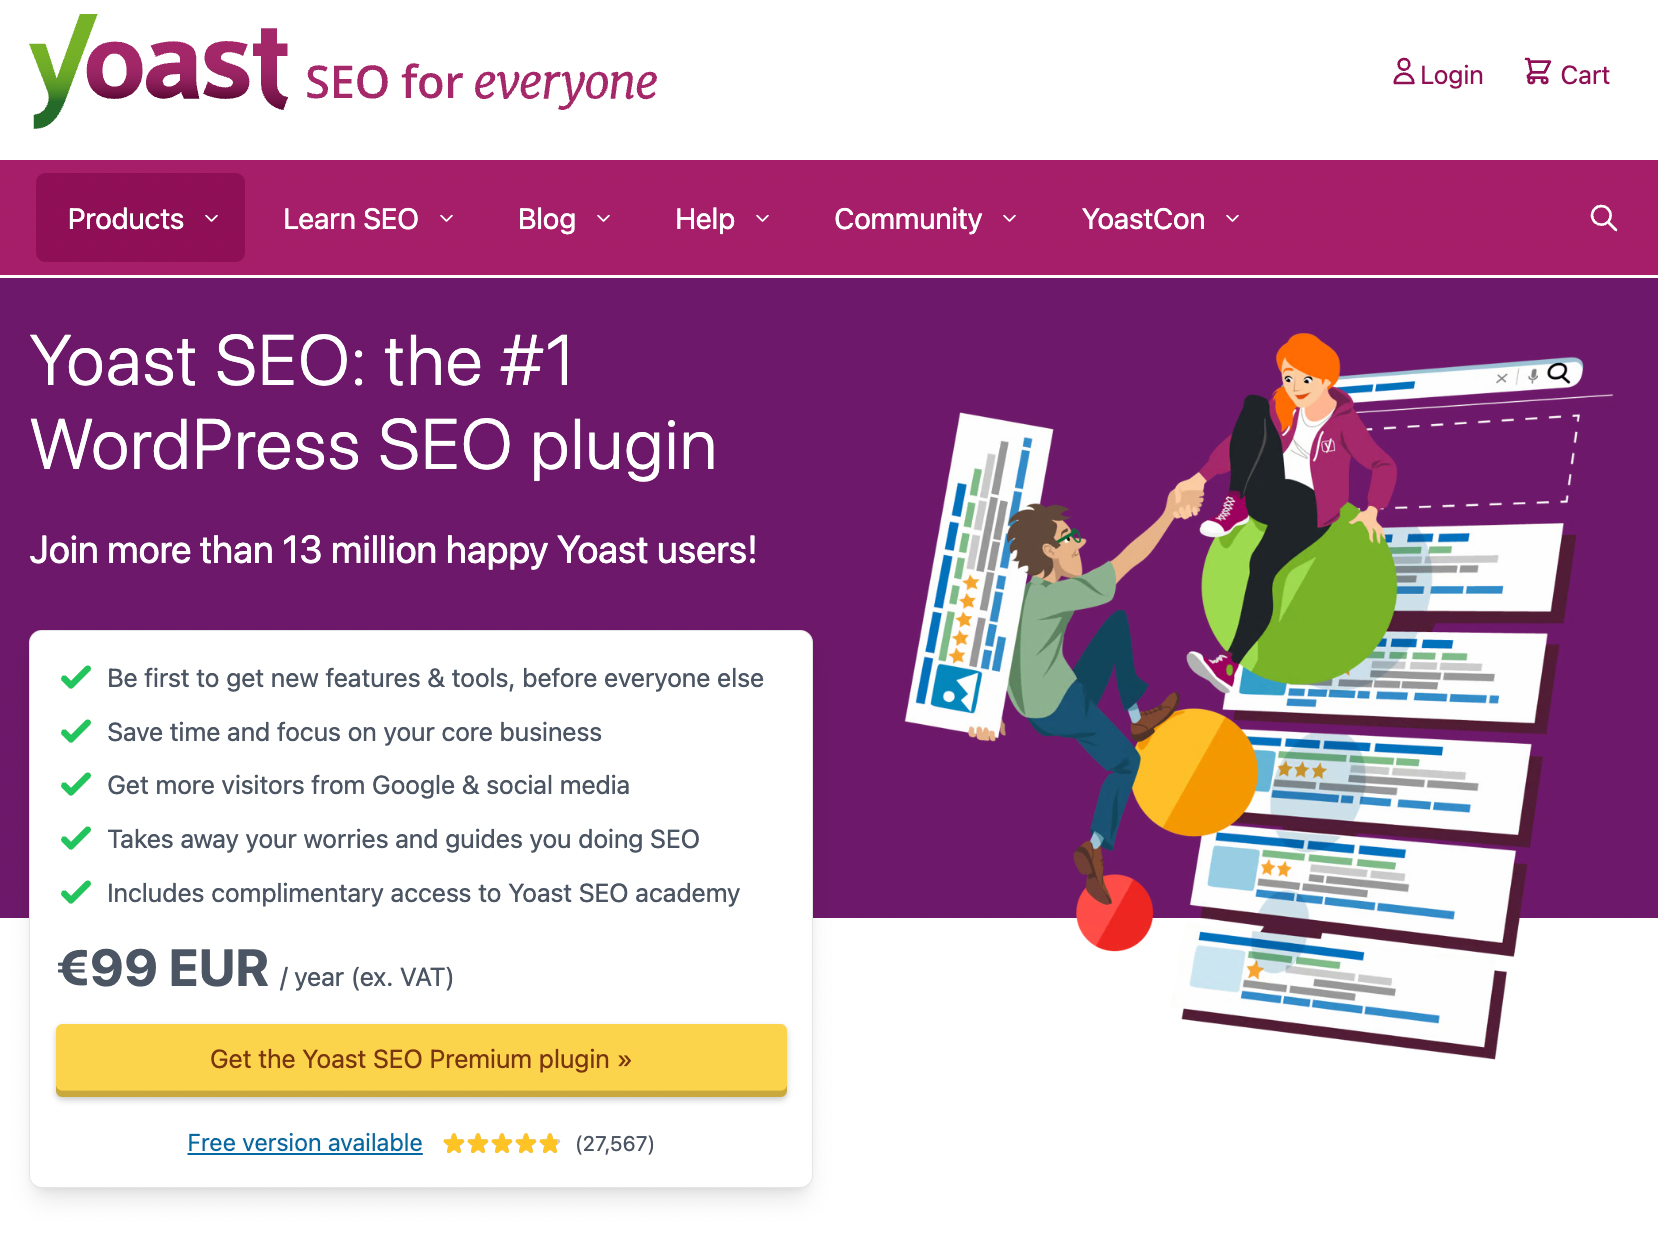 Yoast SEO is one of the premium WordPress plugins, it also comes with a free plan.